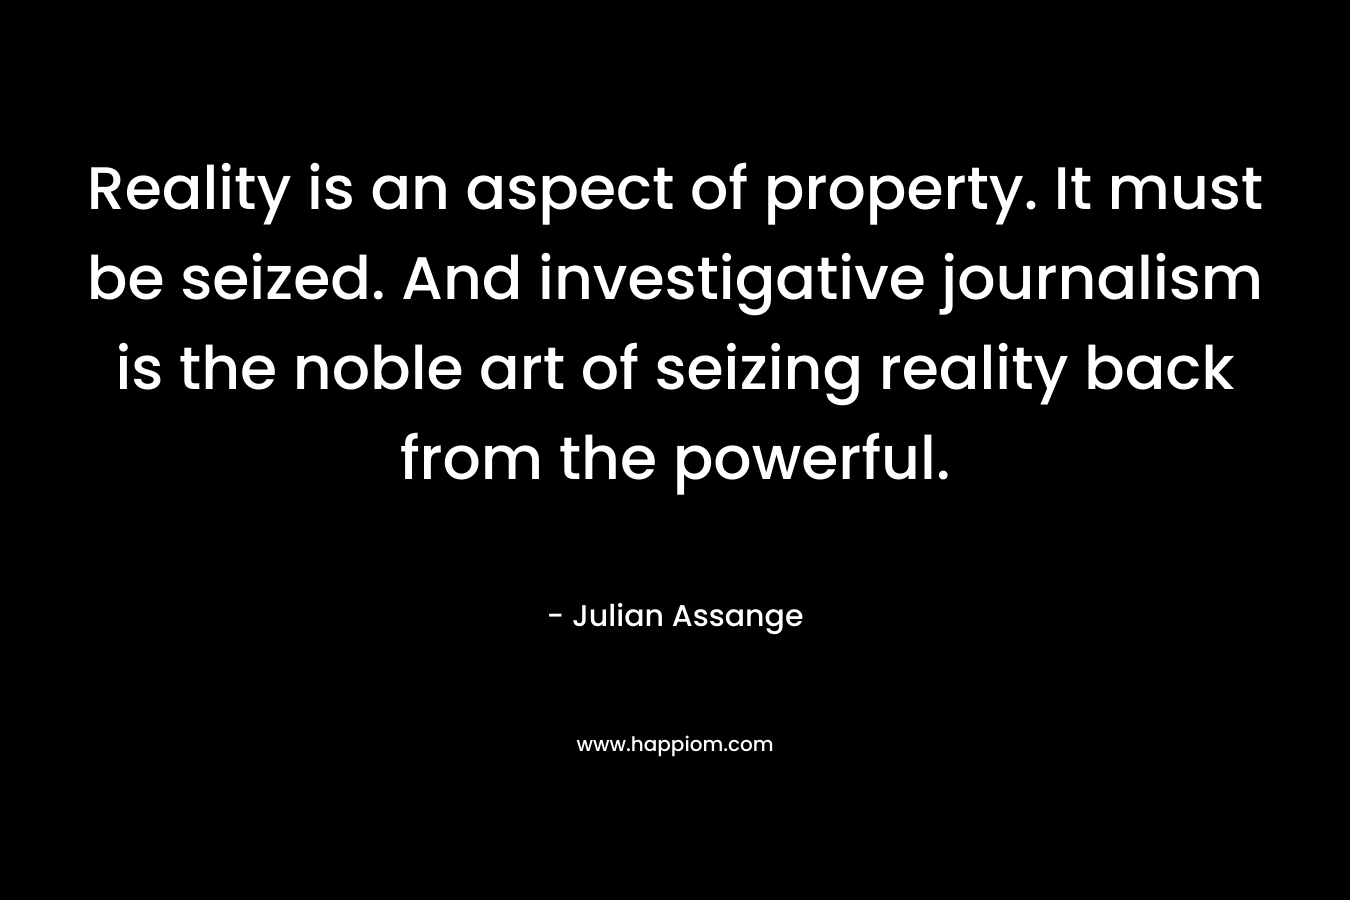 Reality is an aspect of property. It must be seized. And investigative journalism is the noble art of seizing reality back from the powerful.